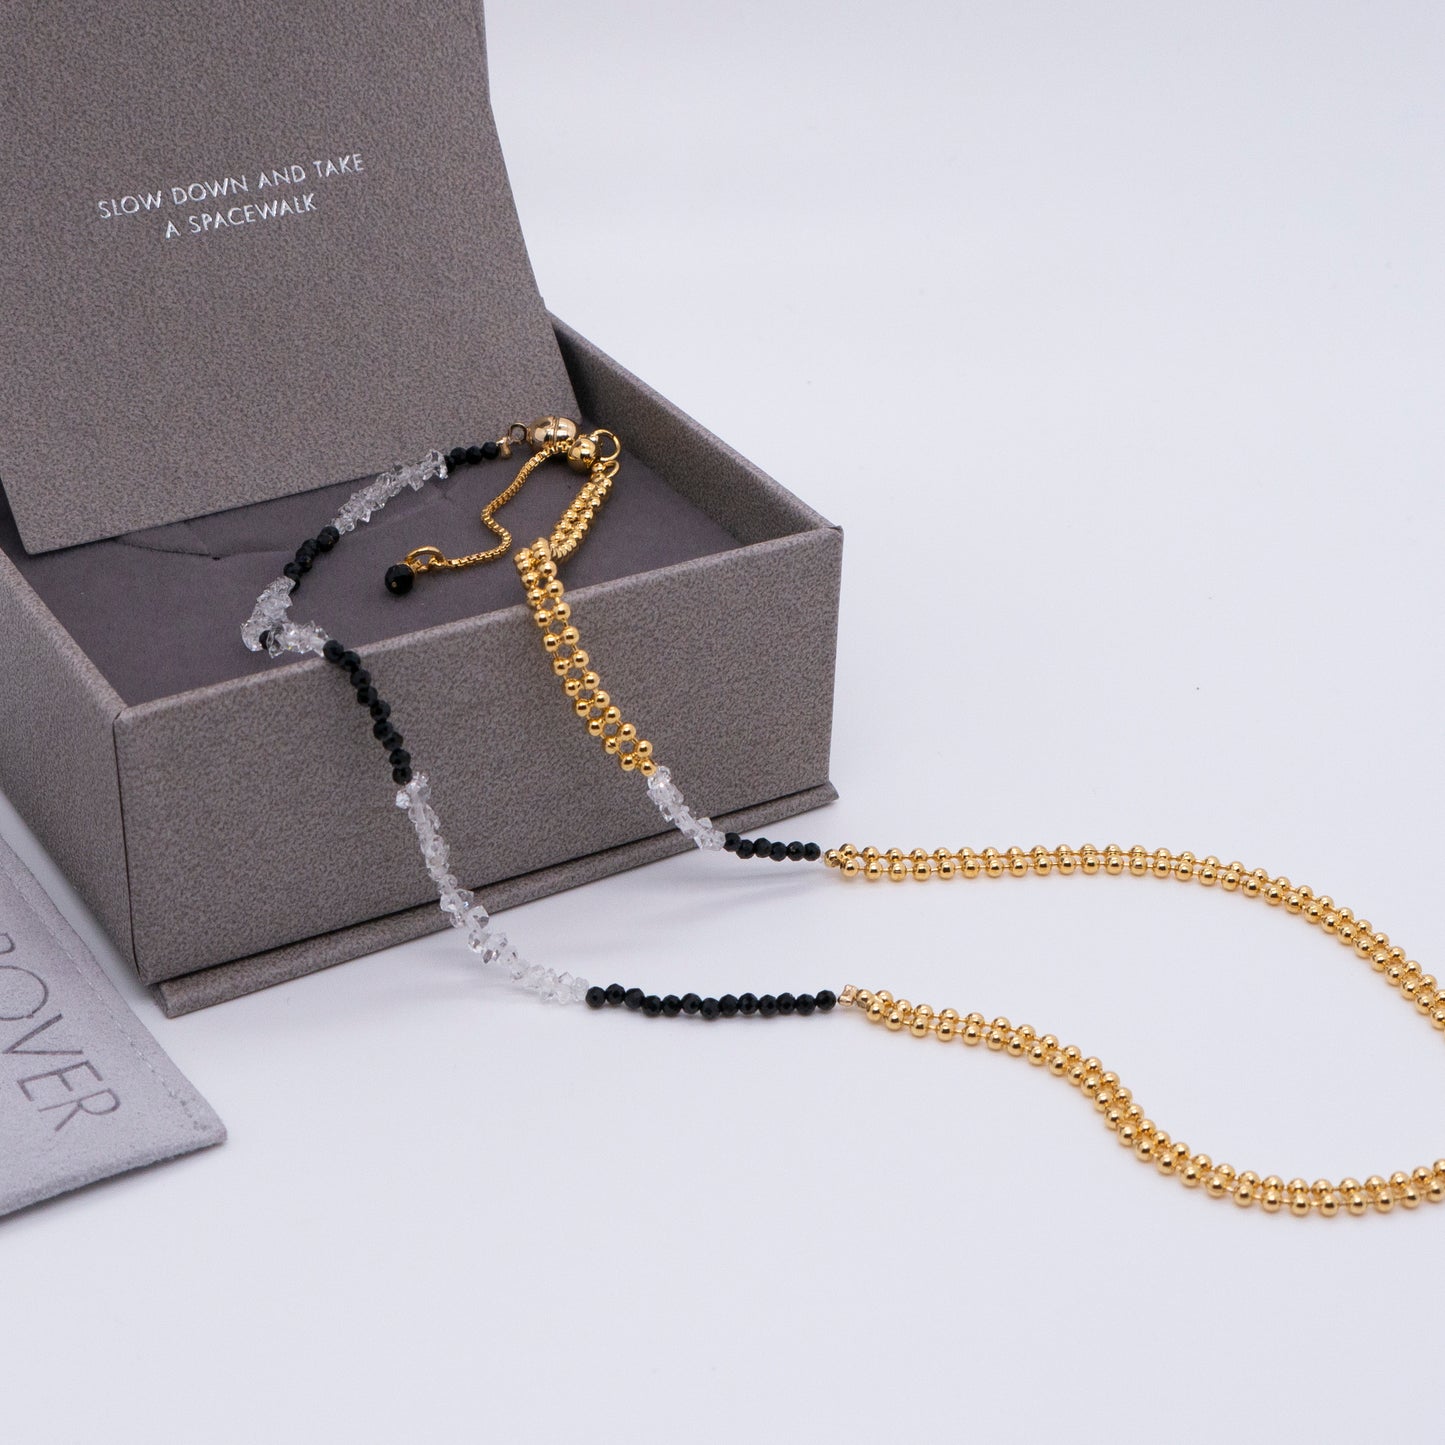 Space Ice - Beaded Chain Necklace / Bracelet (18K Gold Plated) 